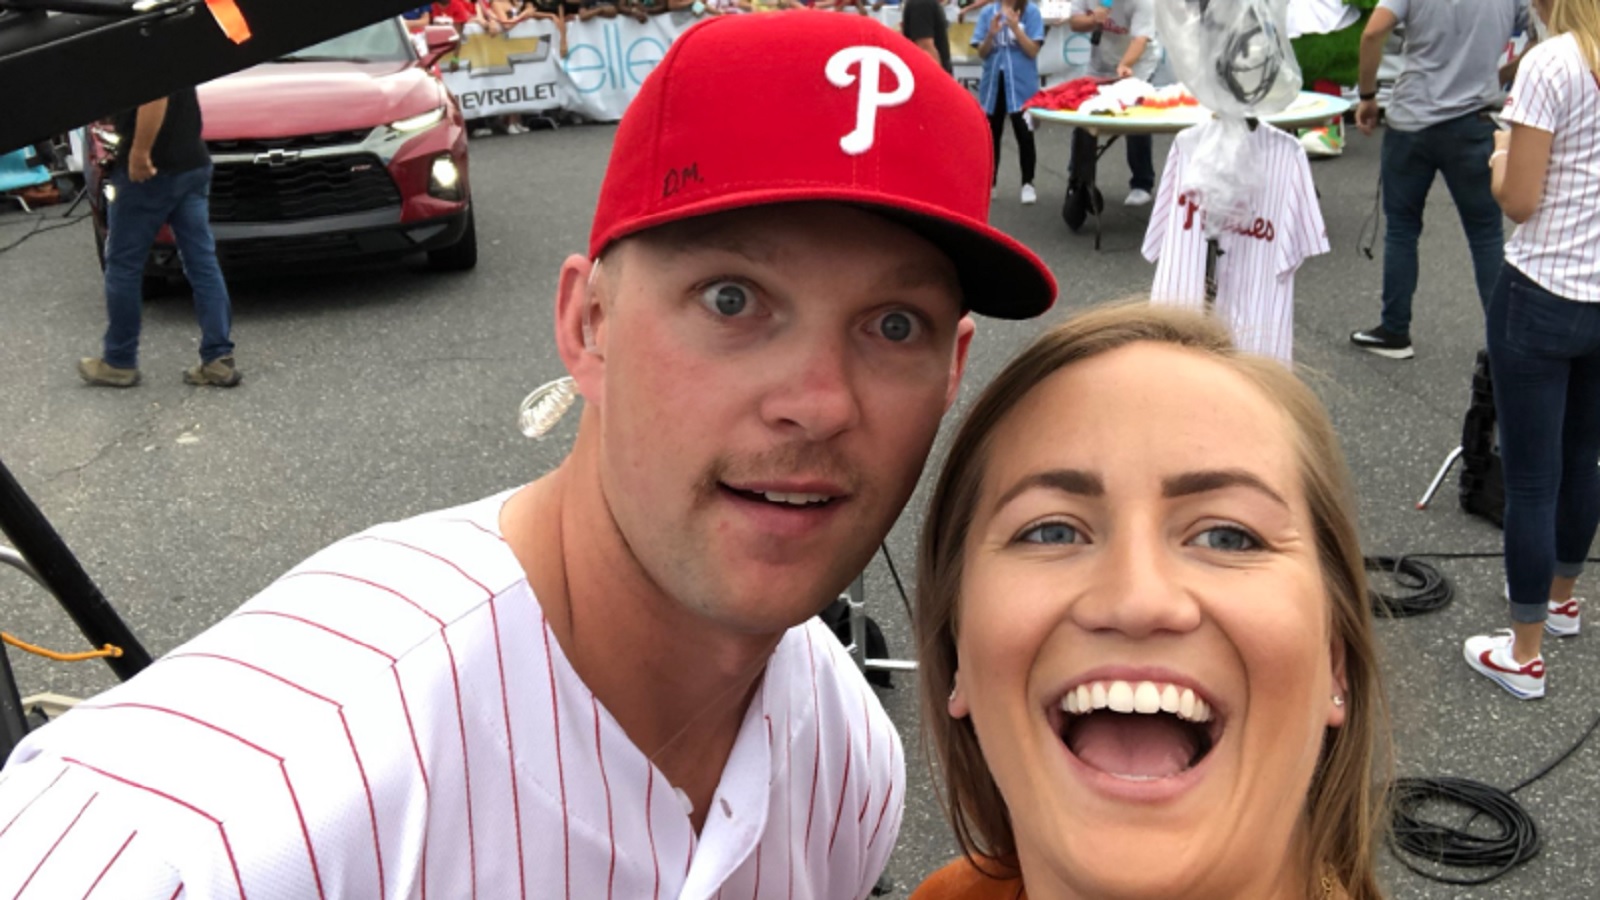 Photo of Phillies Star's Wife Buying 50 Beers for Fans Goes Viral - Sports  Illustrated